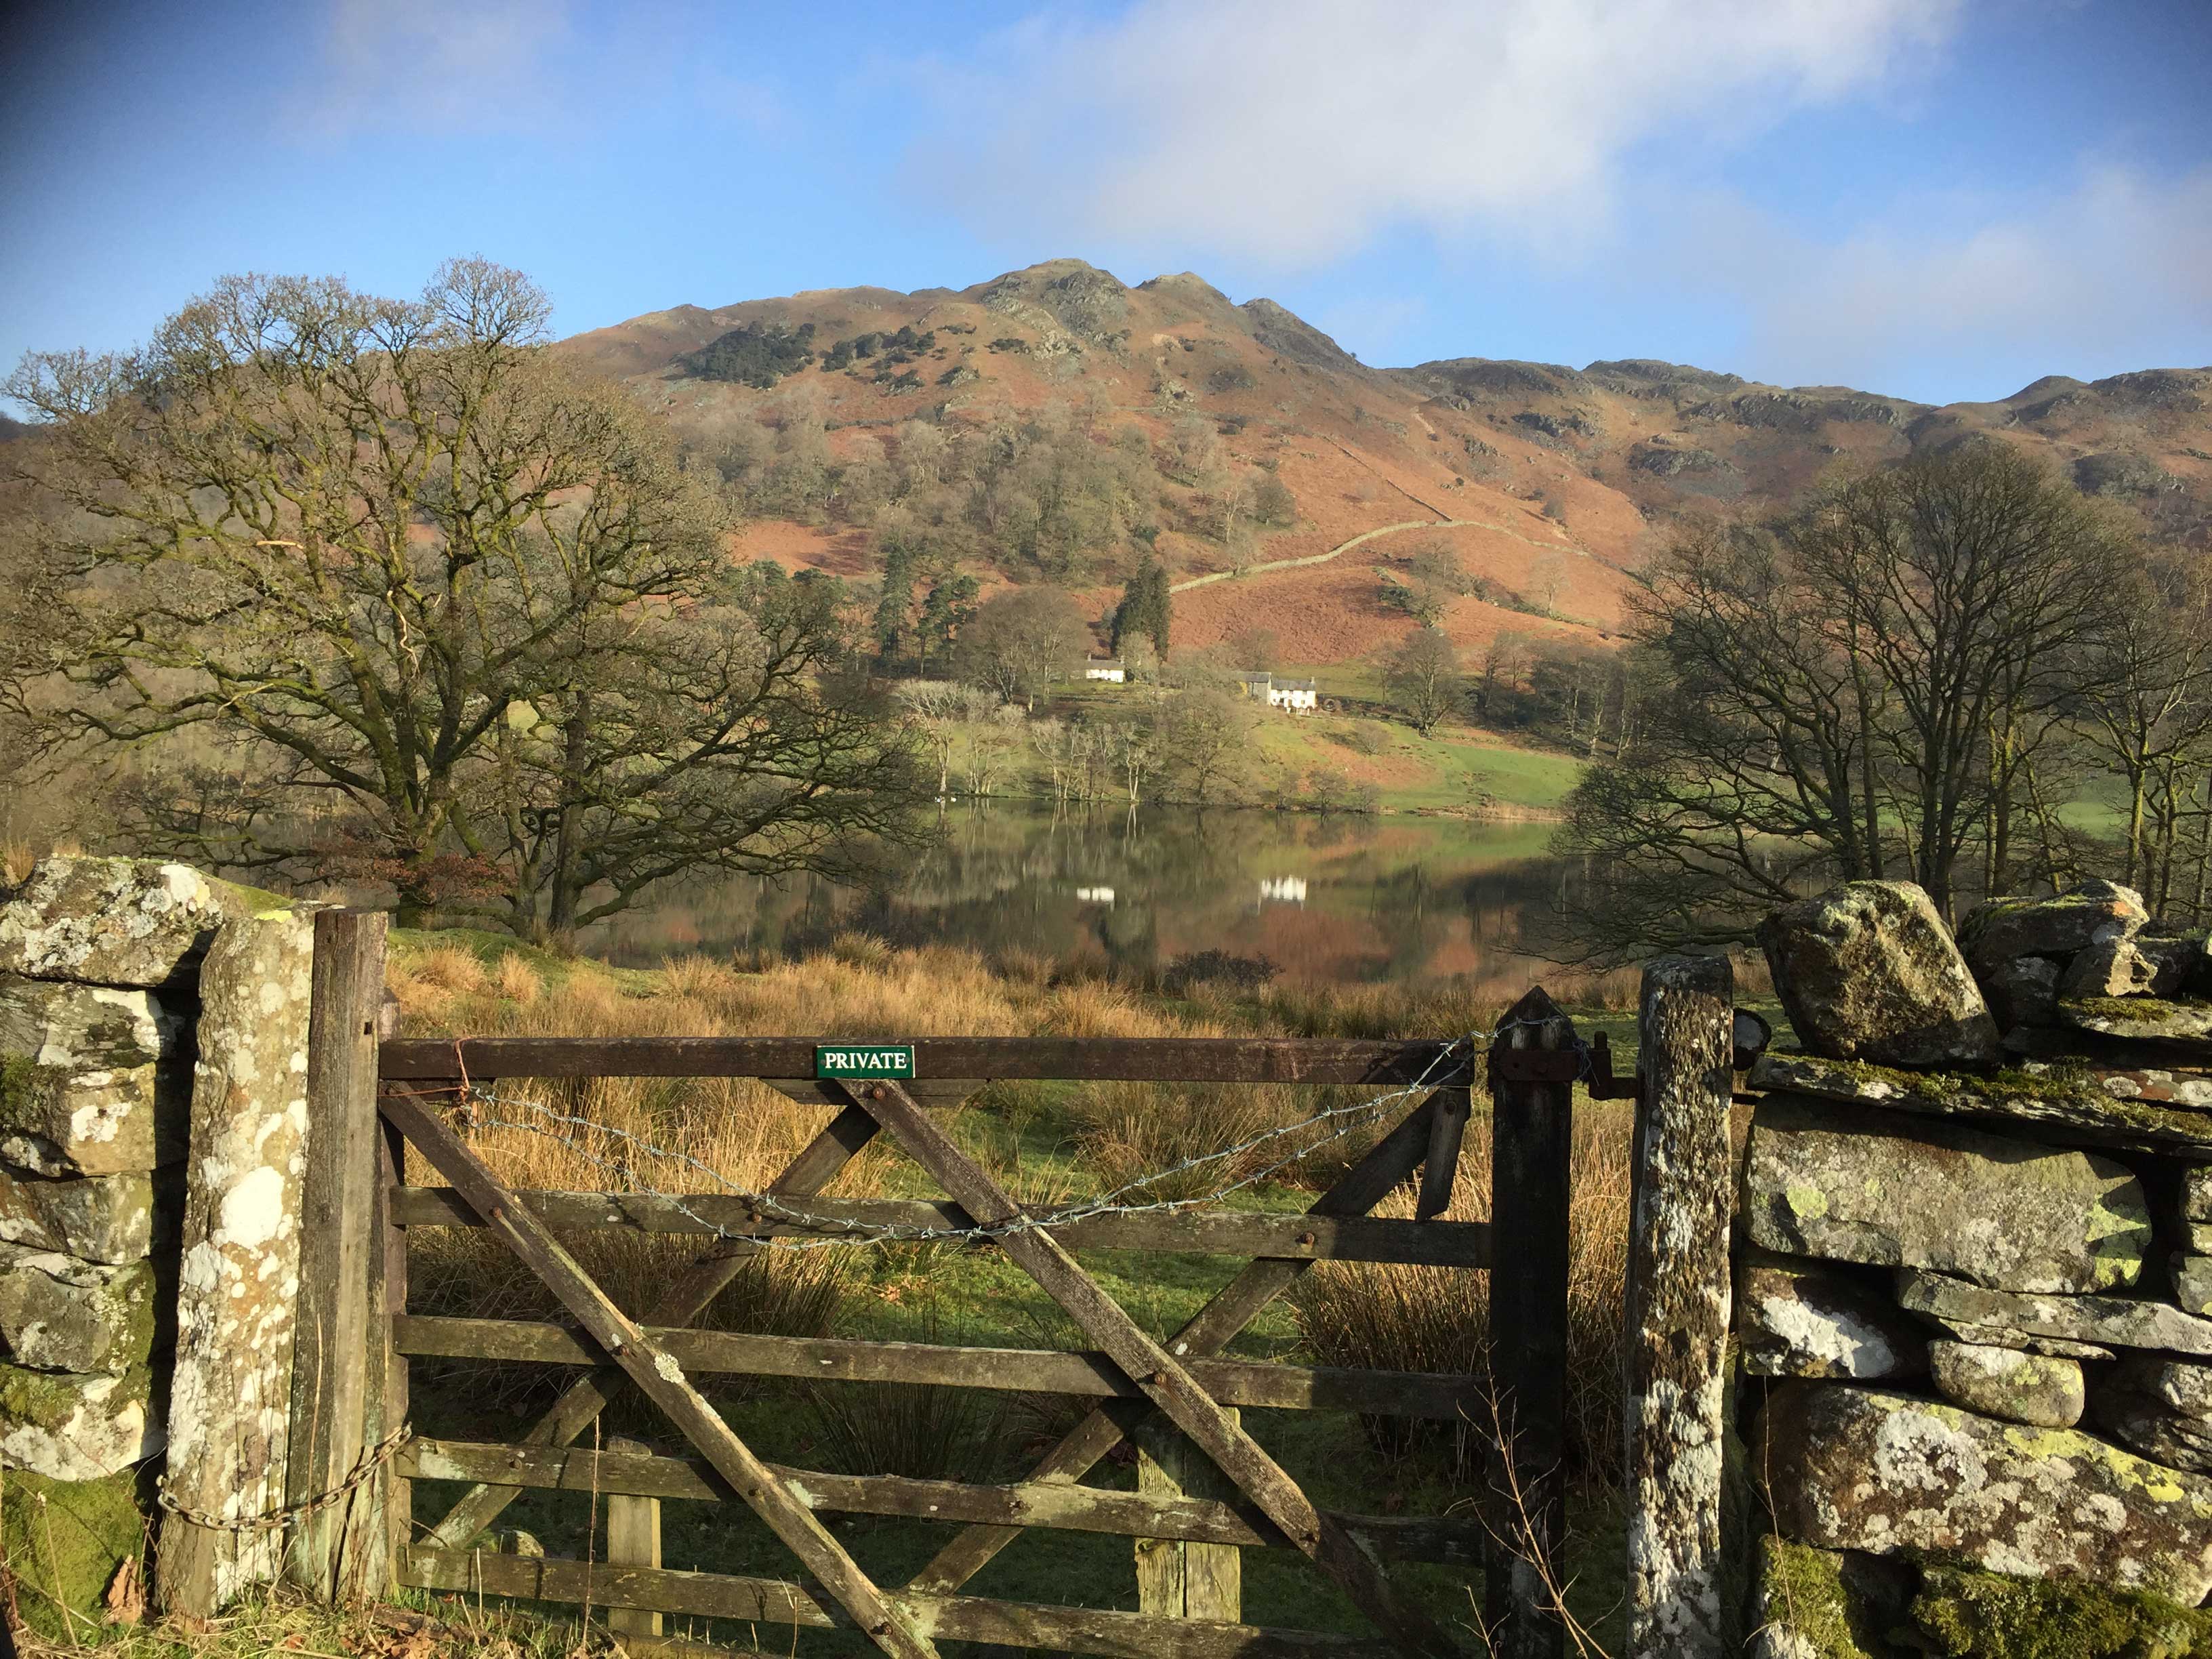 A typical fell view in the Lake District